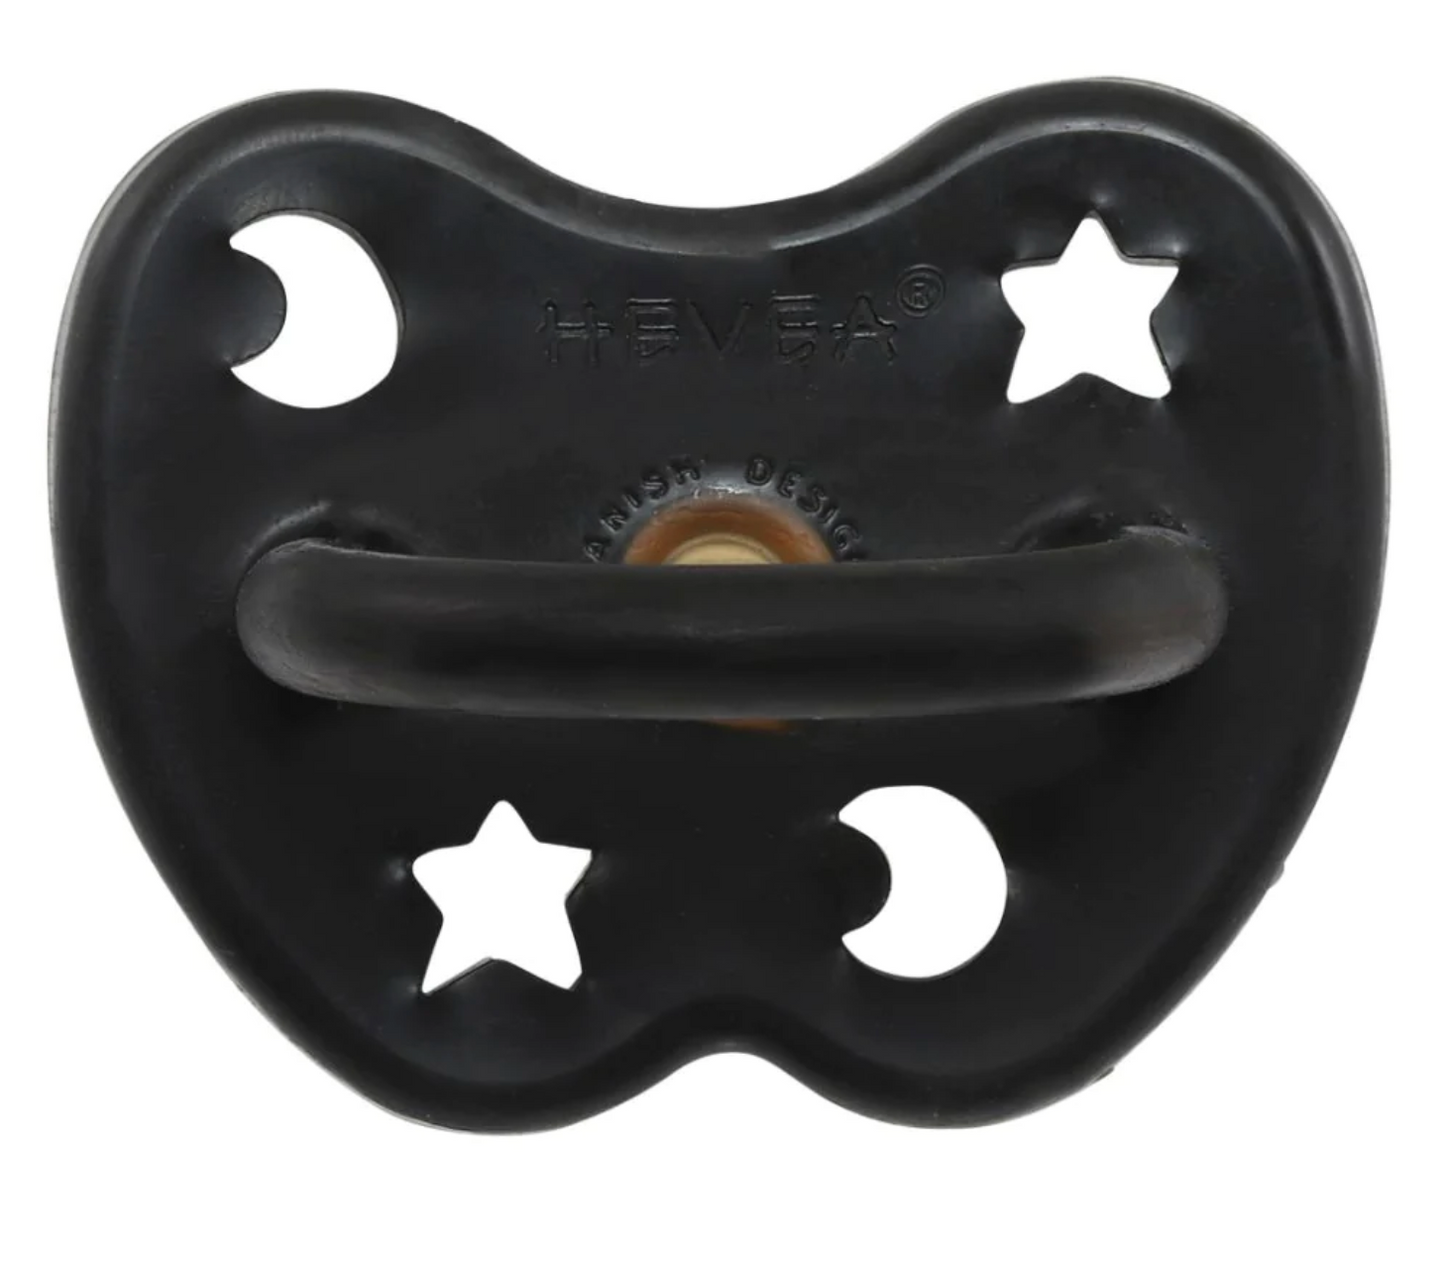 Hevea Pacifier Outer Space Black -Round 3-36m